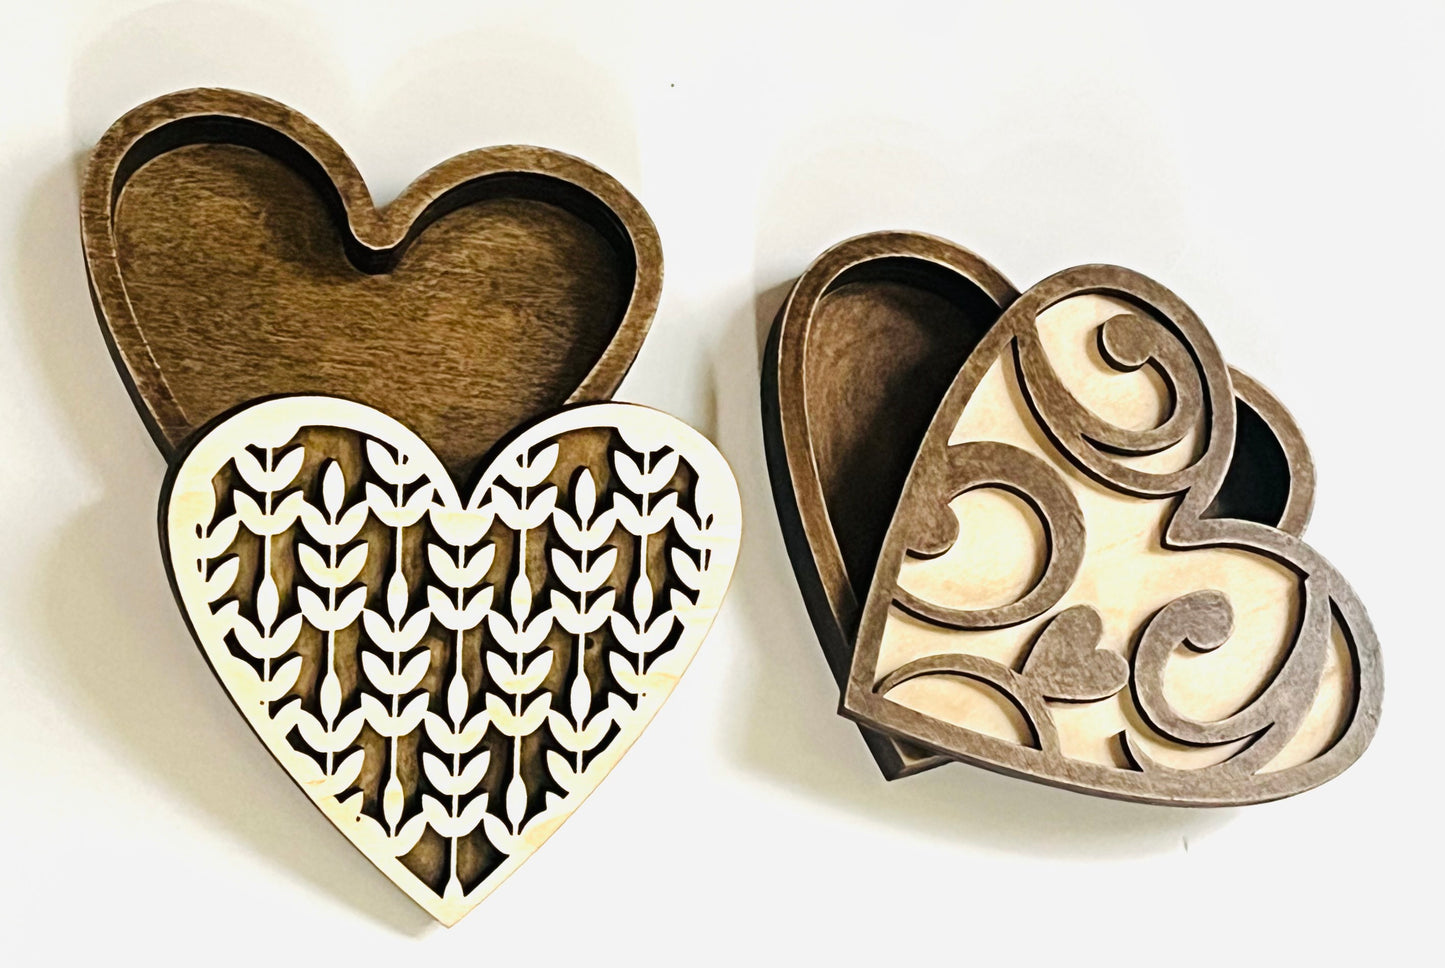 Heart Shaped Trinket Boxes with Lids